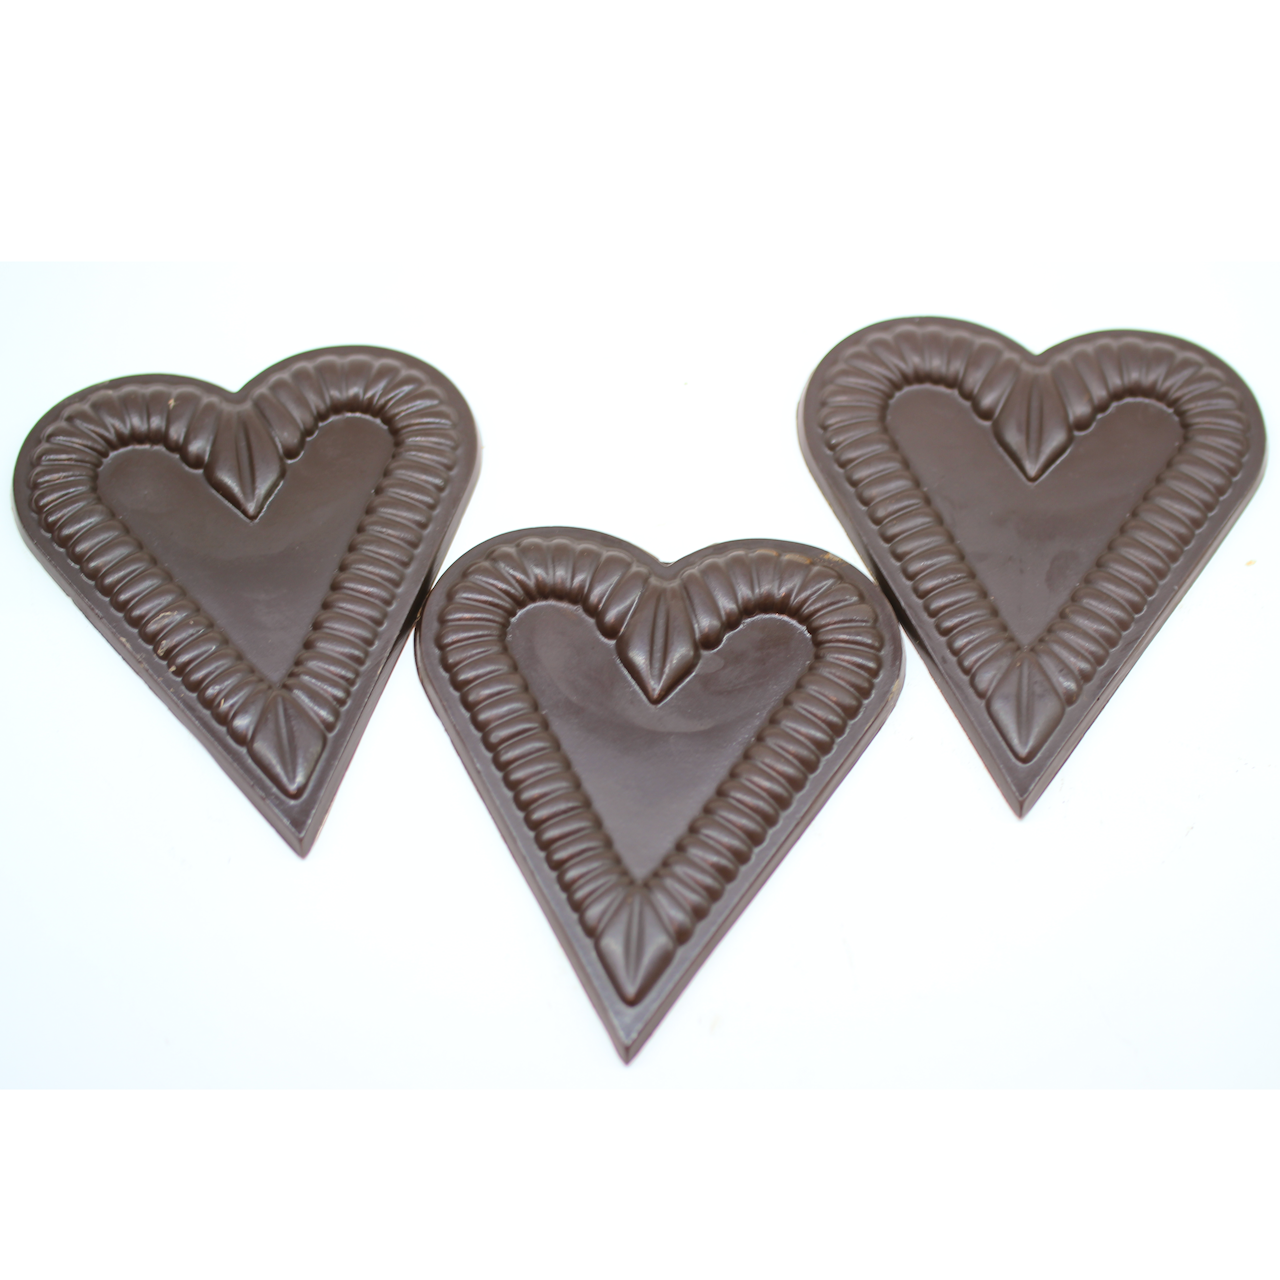 3 Solid Chocolate Hearts (Individually Wrapped)